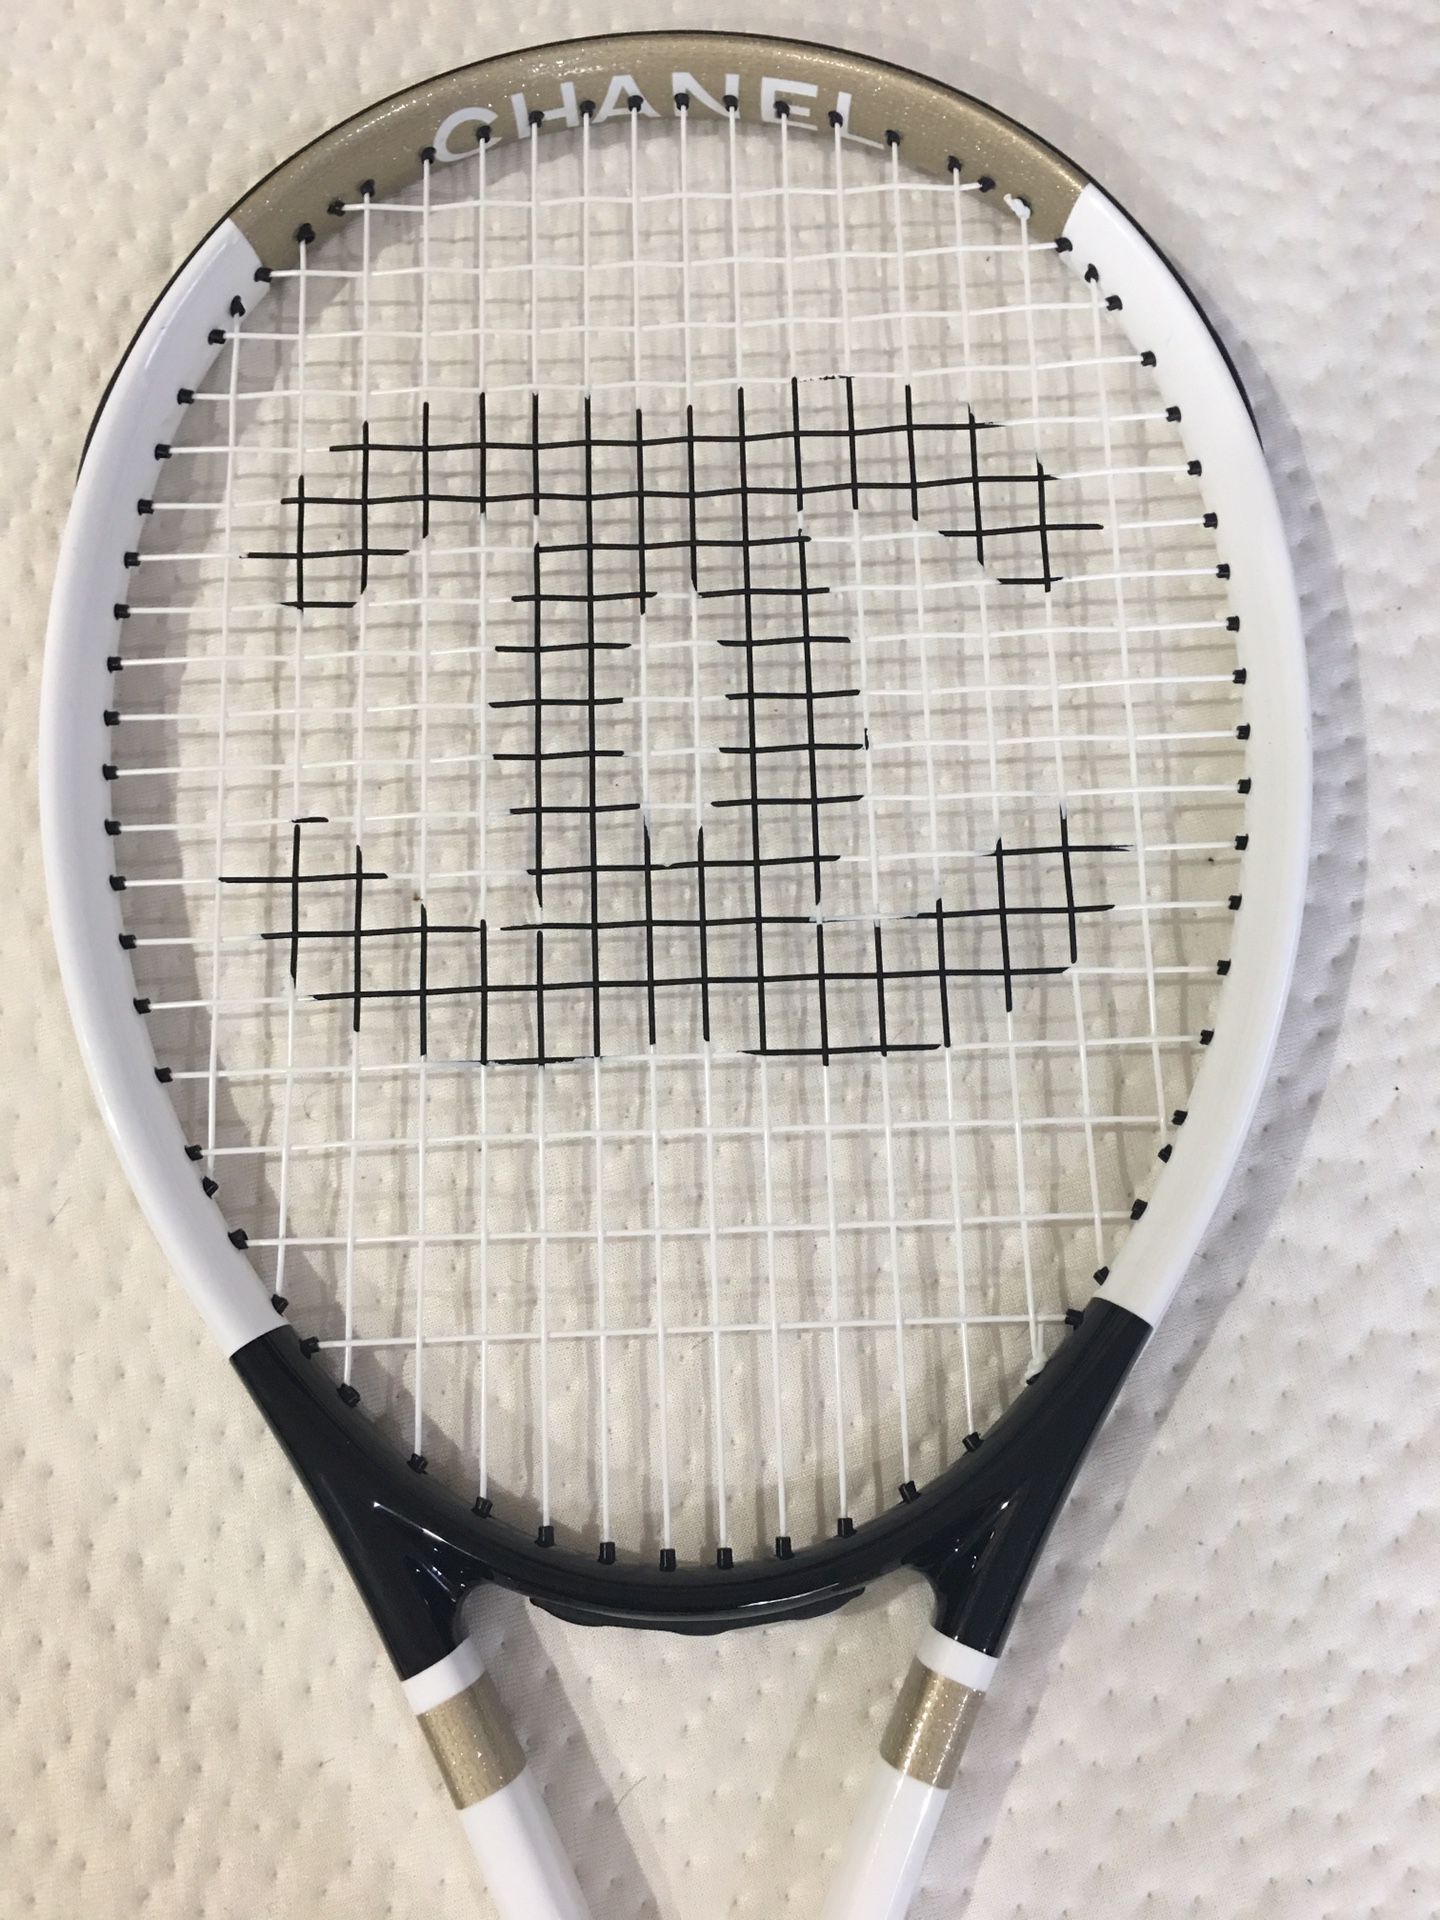 Chanel tennis racket set for Sale in Coral Gables, FL - OfferUp